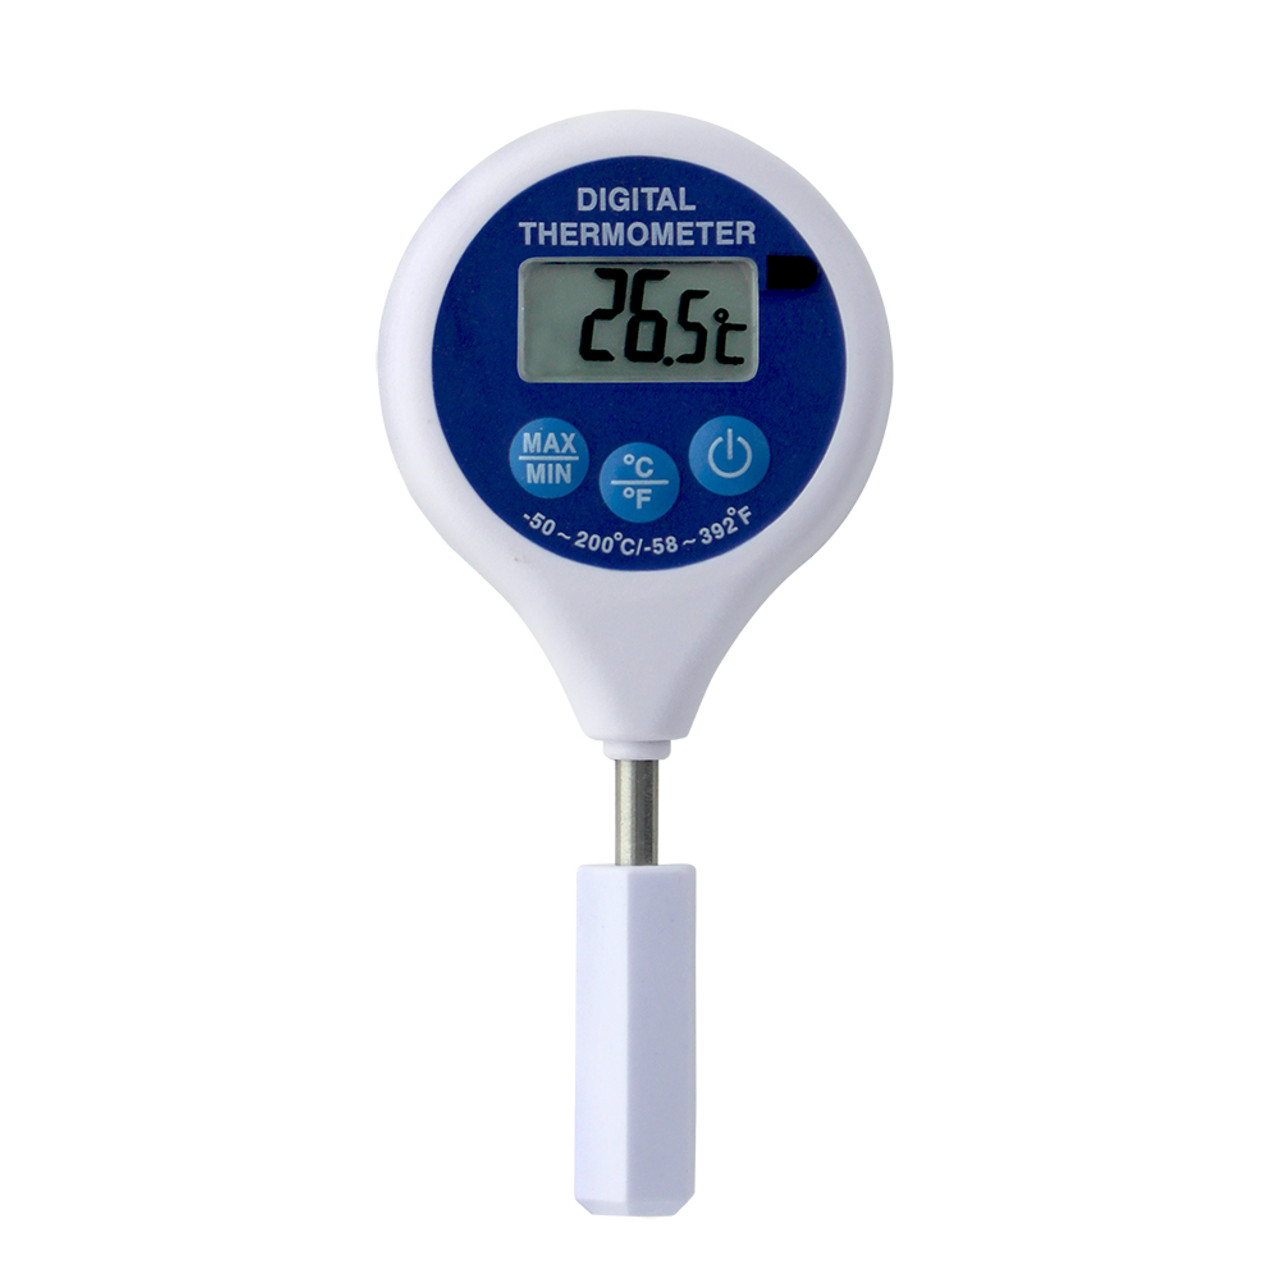 https://cdn11.bigcommerce.com/s-1x0gz1809s/images/stencil/1280x1280/products/4286/12577/grain%20father%20digital%20thermometer%20for%20alembic%20dome%20bc10__02834.1628183244.jpg?c=2